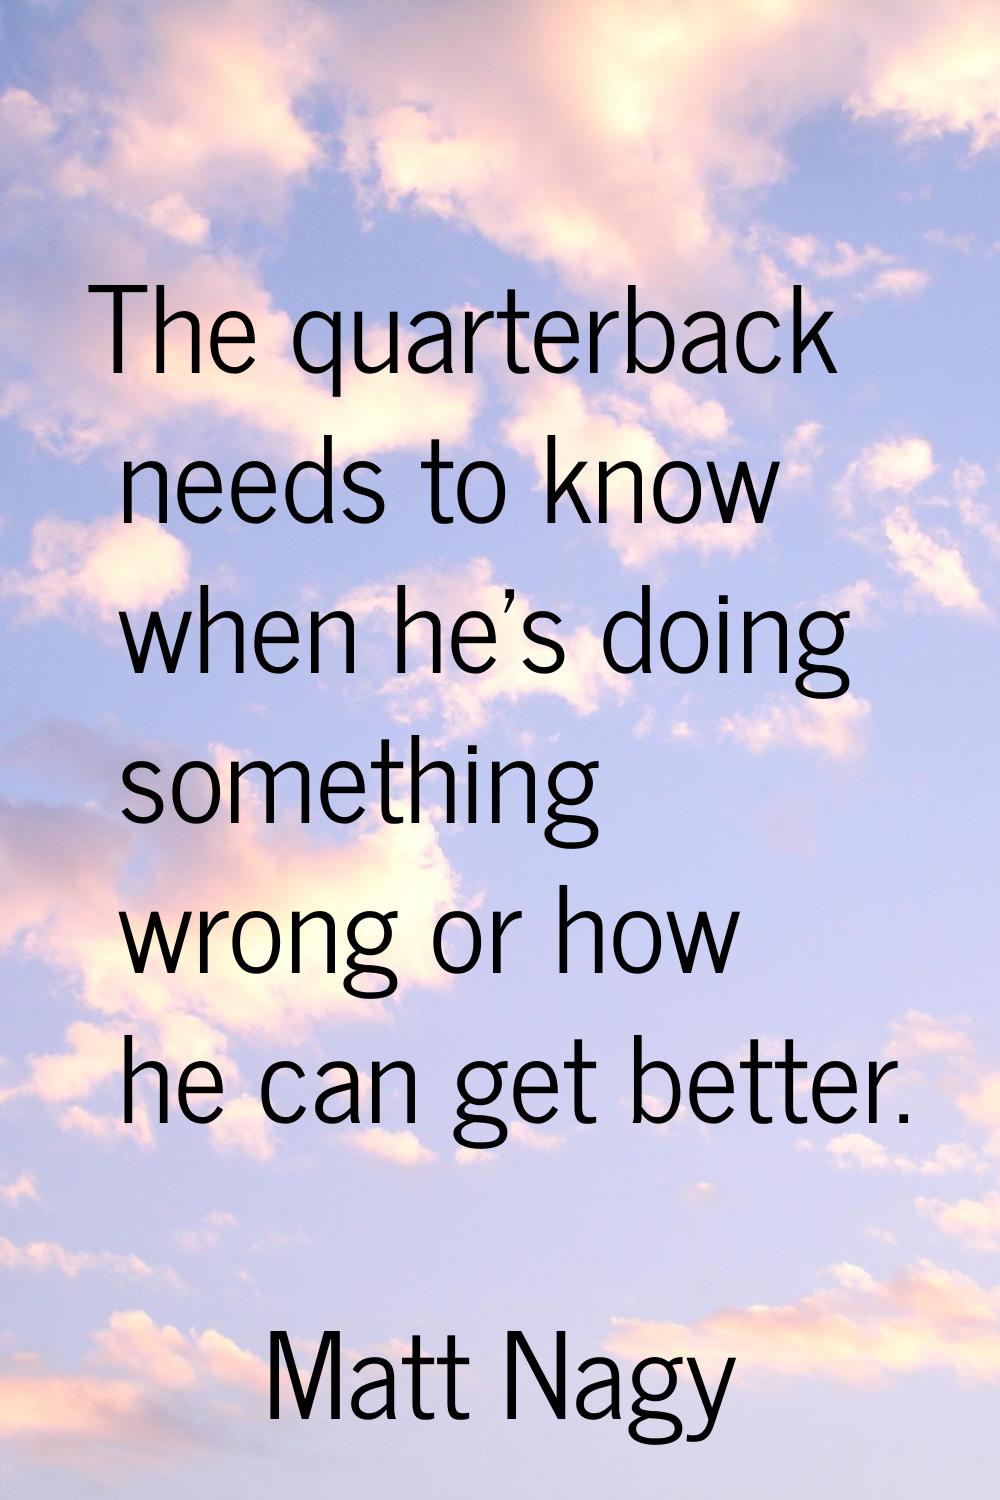 The quarterback needs to know when he's doing something wrong or how he can get better.